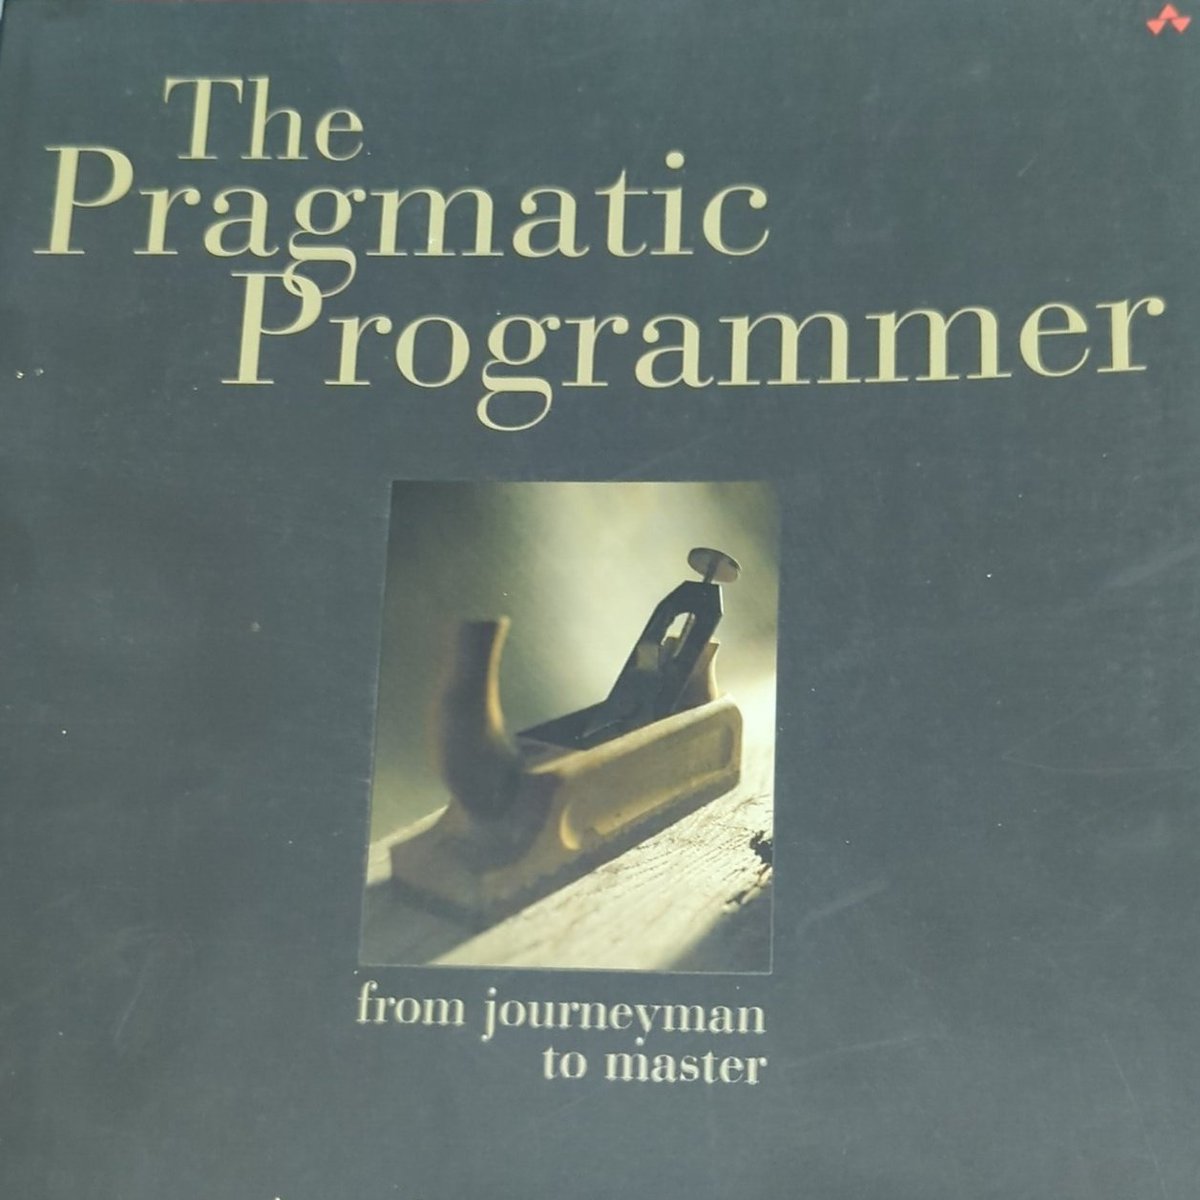 Spending my Saturday brushing up on my very rusty knowledge of programming so that I'll at least recognize what's being discussed when I start the new position on Monday. My books are old, but better than nothing.